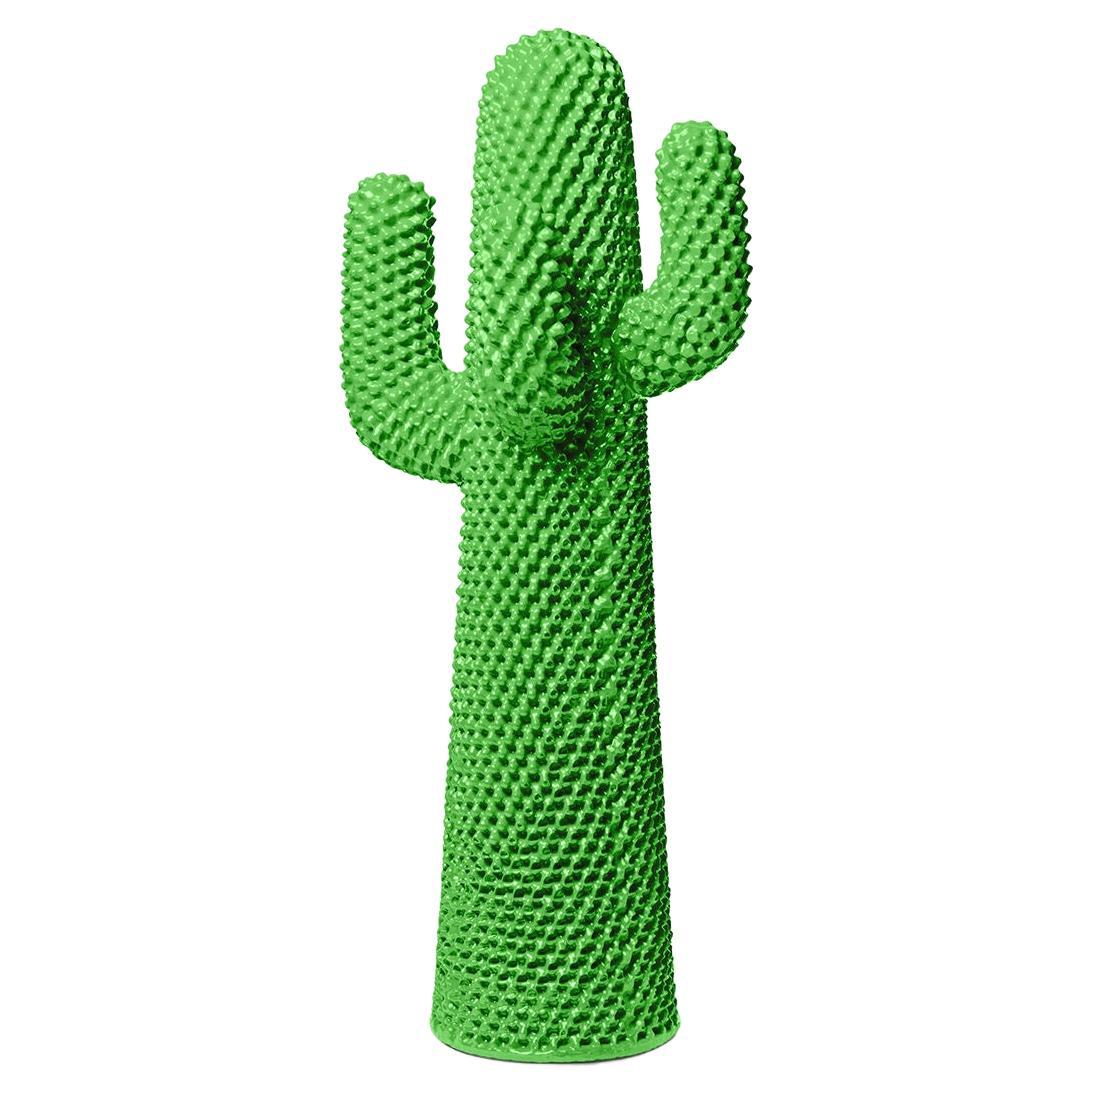 Gufram Another Green Cactus Coat Stand By Drocco/Mello For Sale